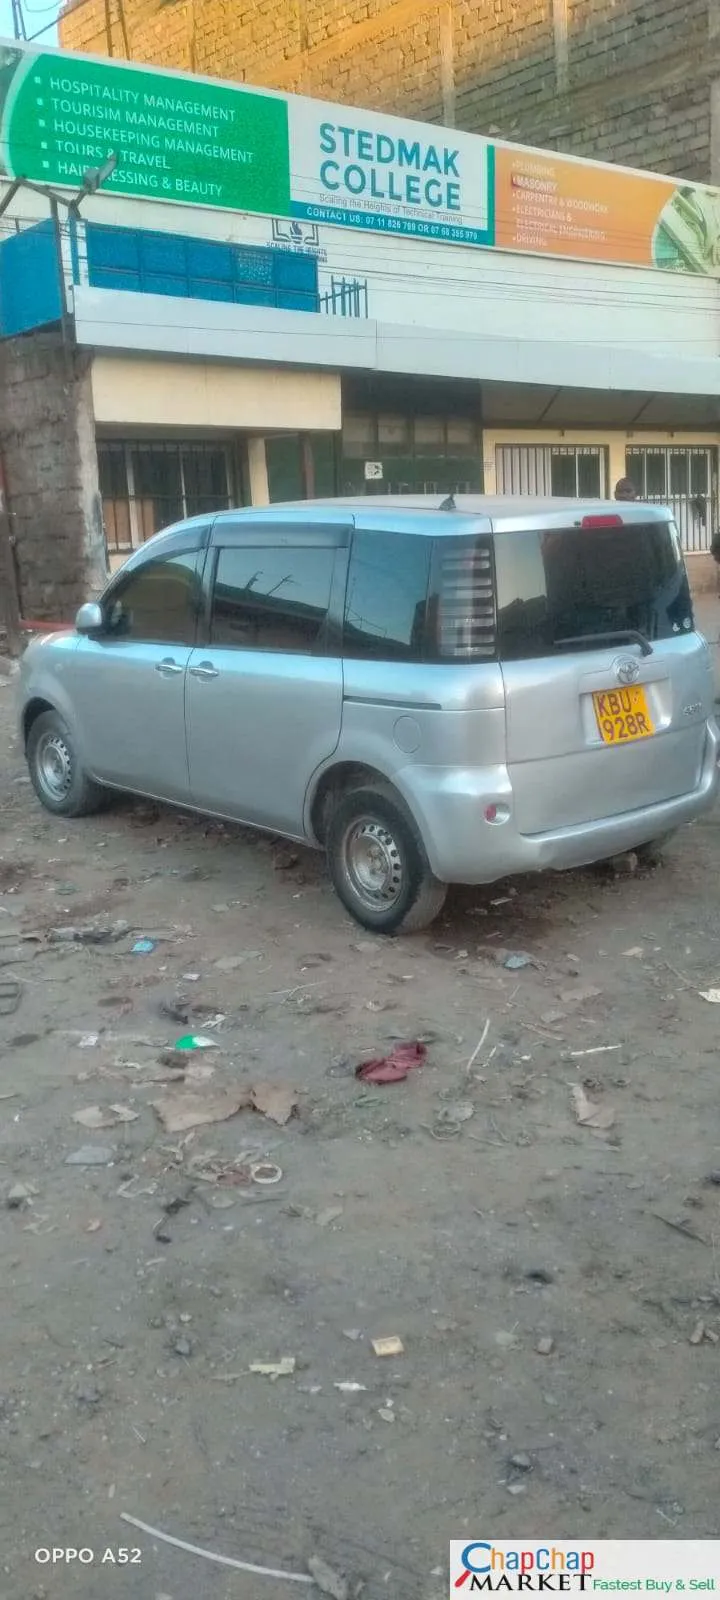 Cars Cars For Sale-Toyota SIENTA for sale in kenya hire purchase installments You Pay 30% Deposit Trade in OK Wow sienta Kenya 480k Only 5